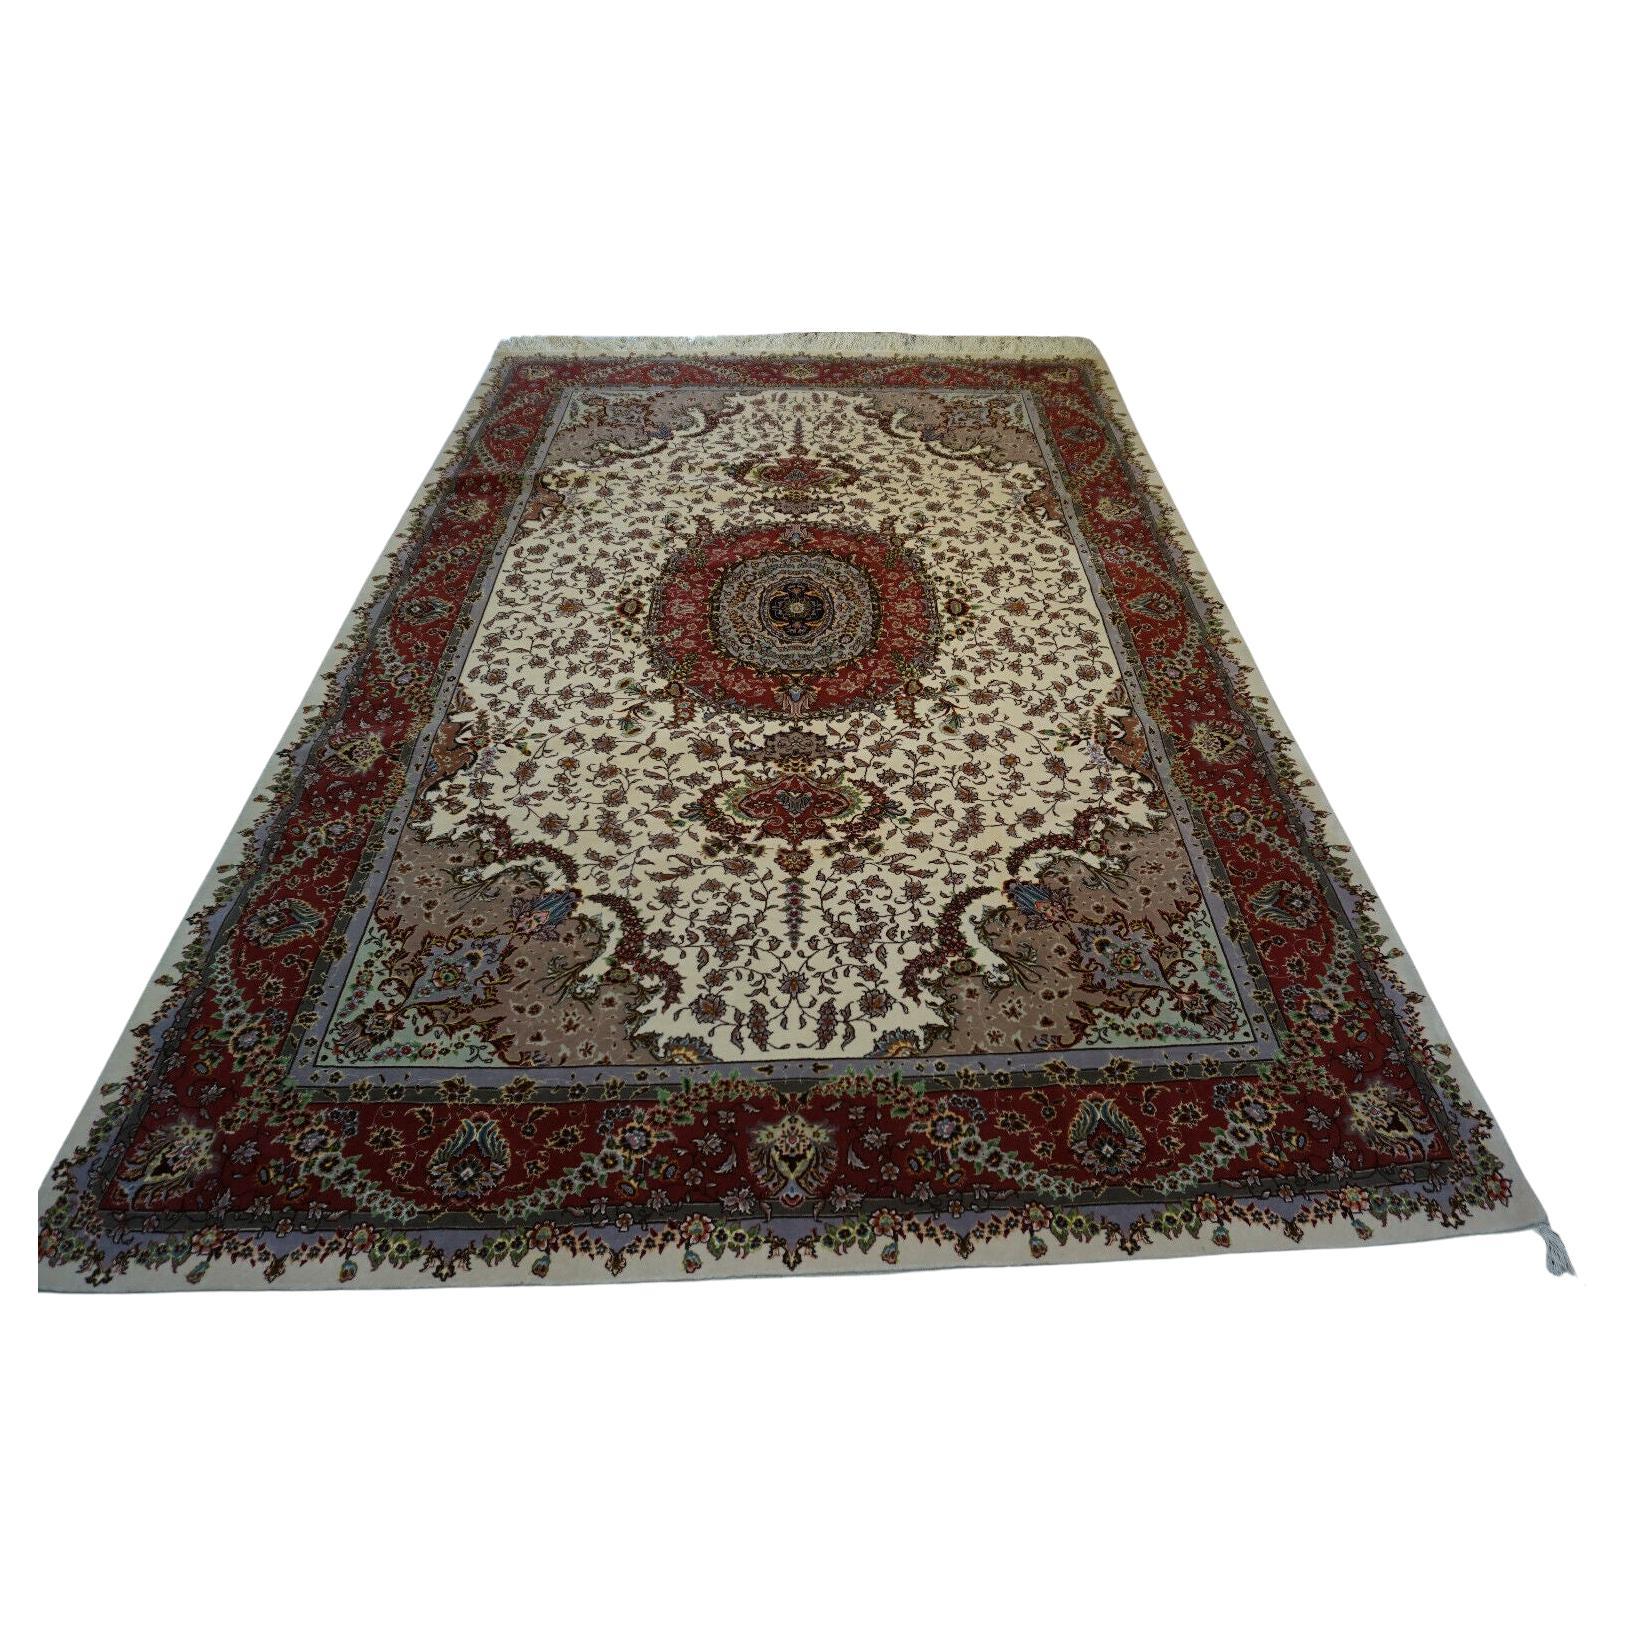 Handmade Vintage Persian Style Tabriz Rug With Silk 6.5' x 10', 1980s - 1D63 For Sale